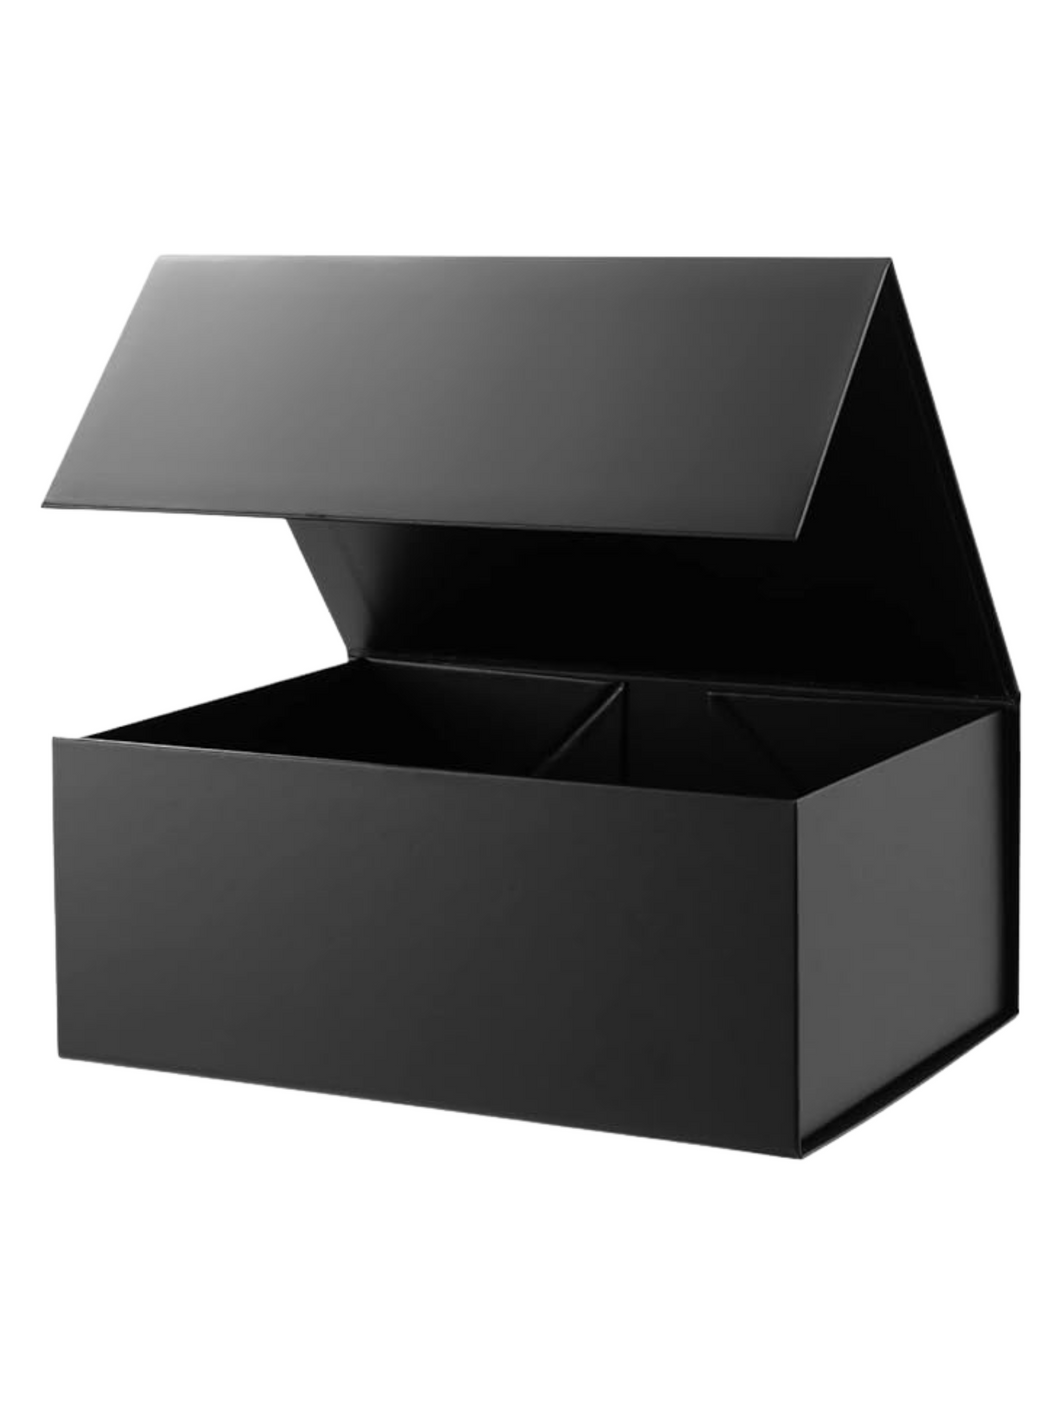 LOGO GIFT BOXES - LUX BOXES